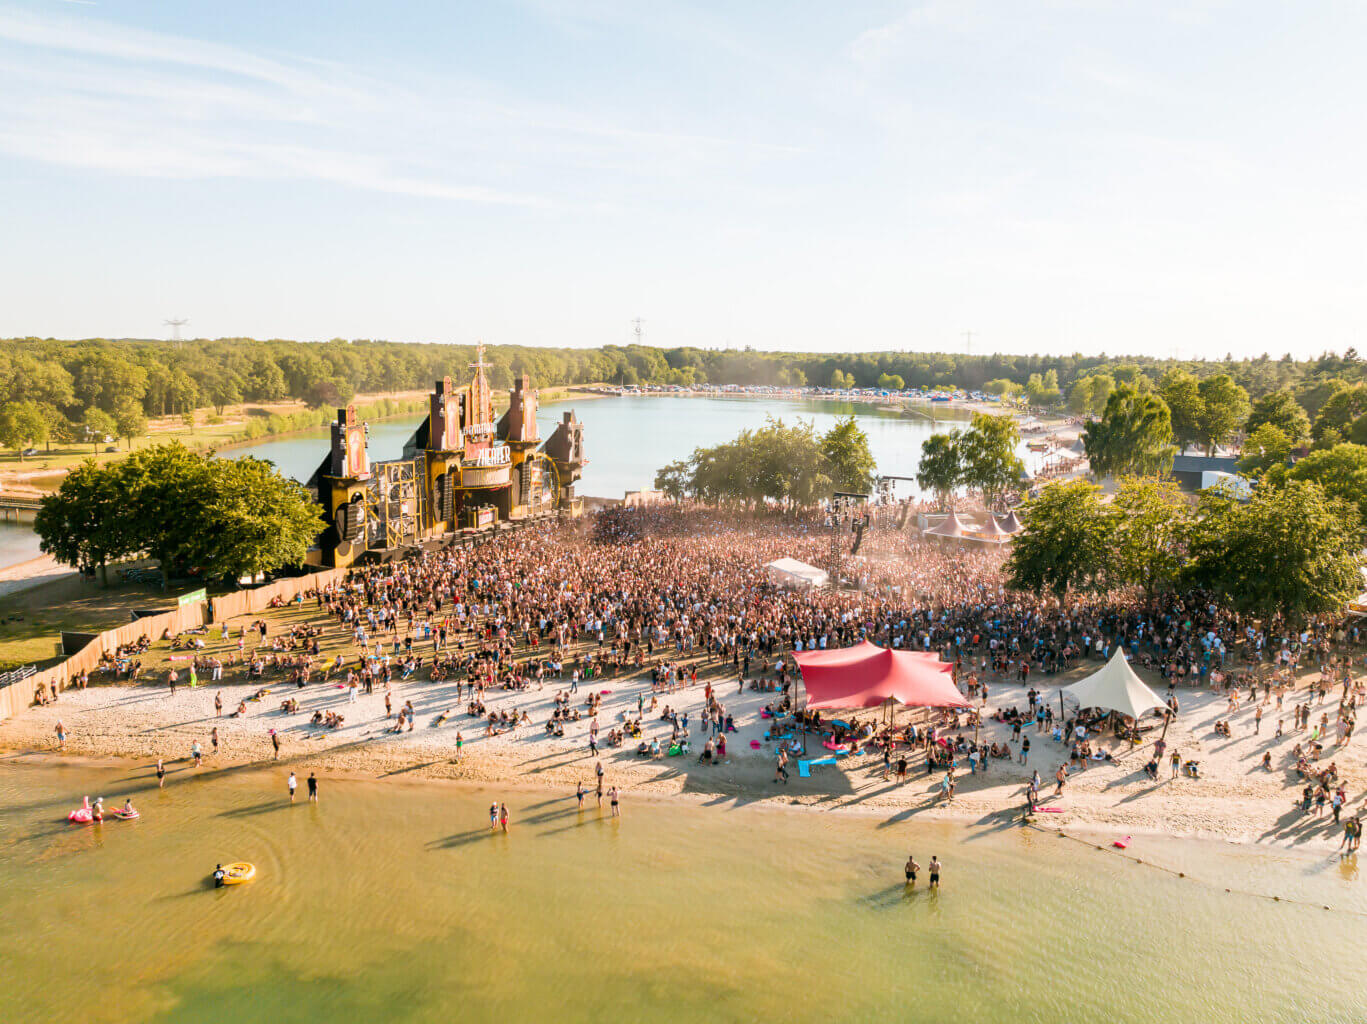 Check the trailer of Dominator Festival 2023 and get ready for the member sale!